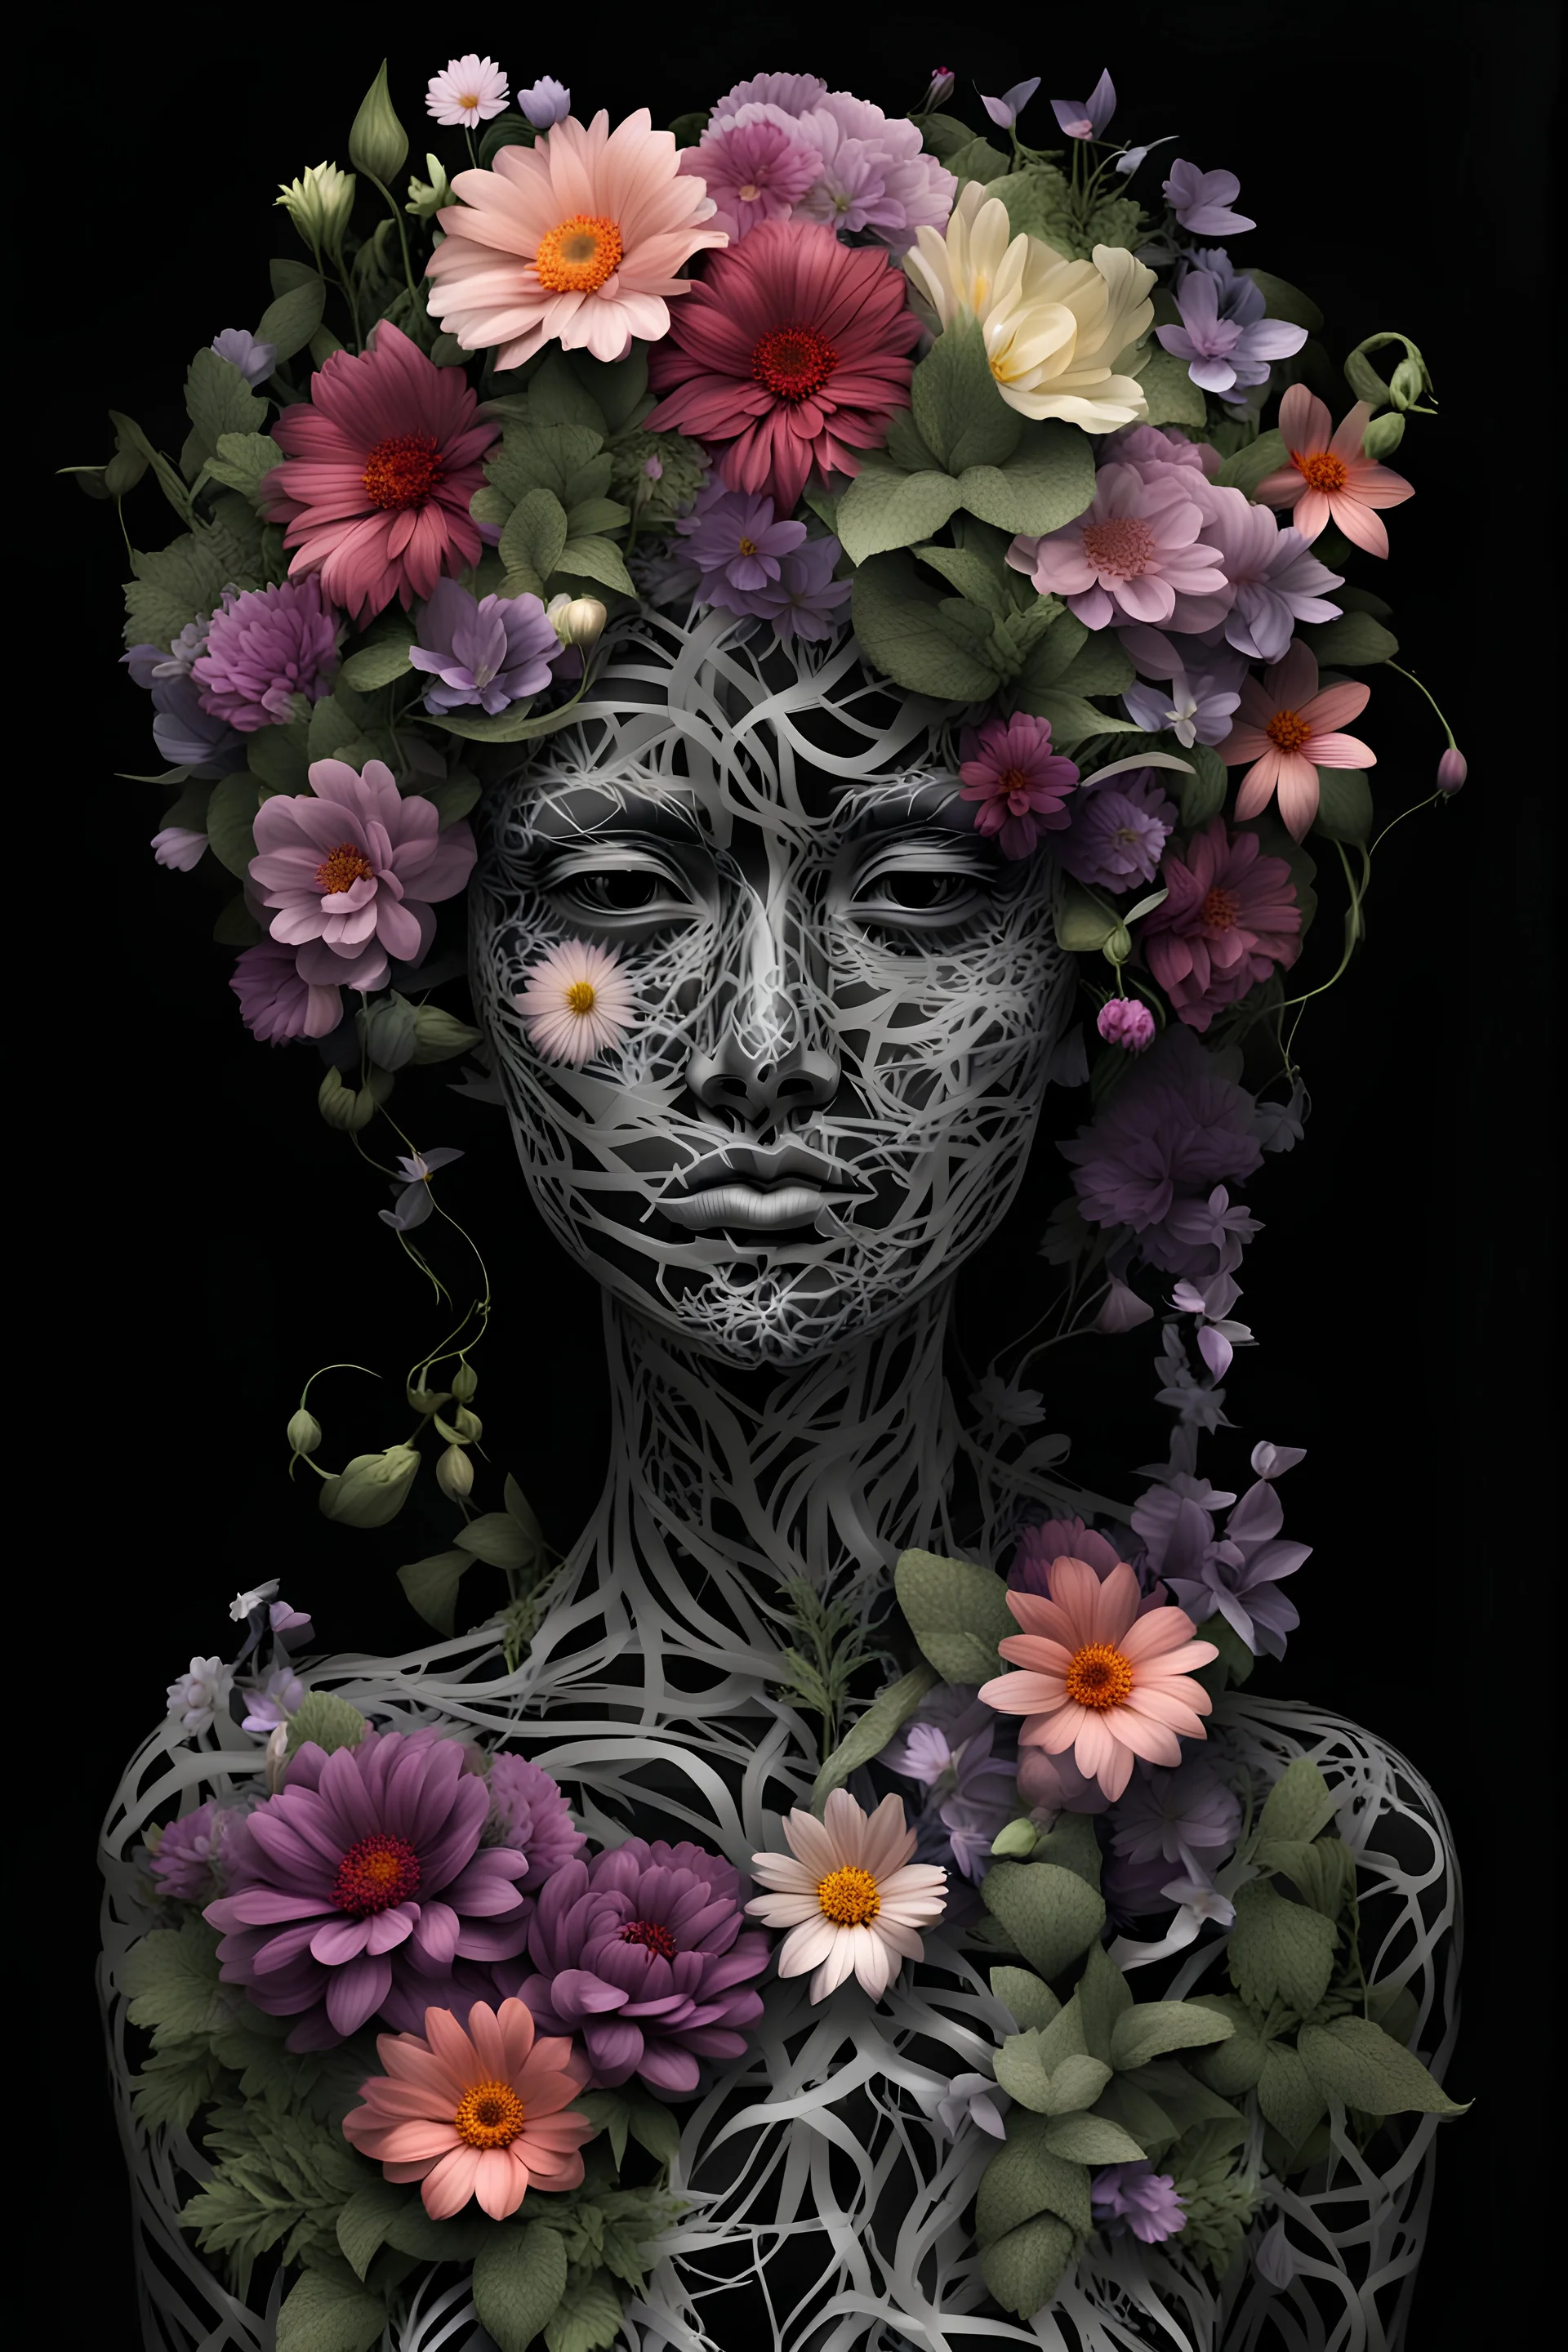 woman made of flowers and vines, x-ray style, black background